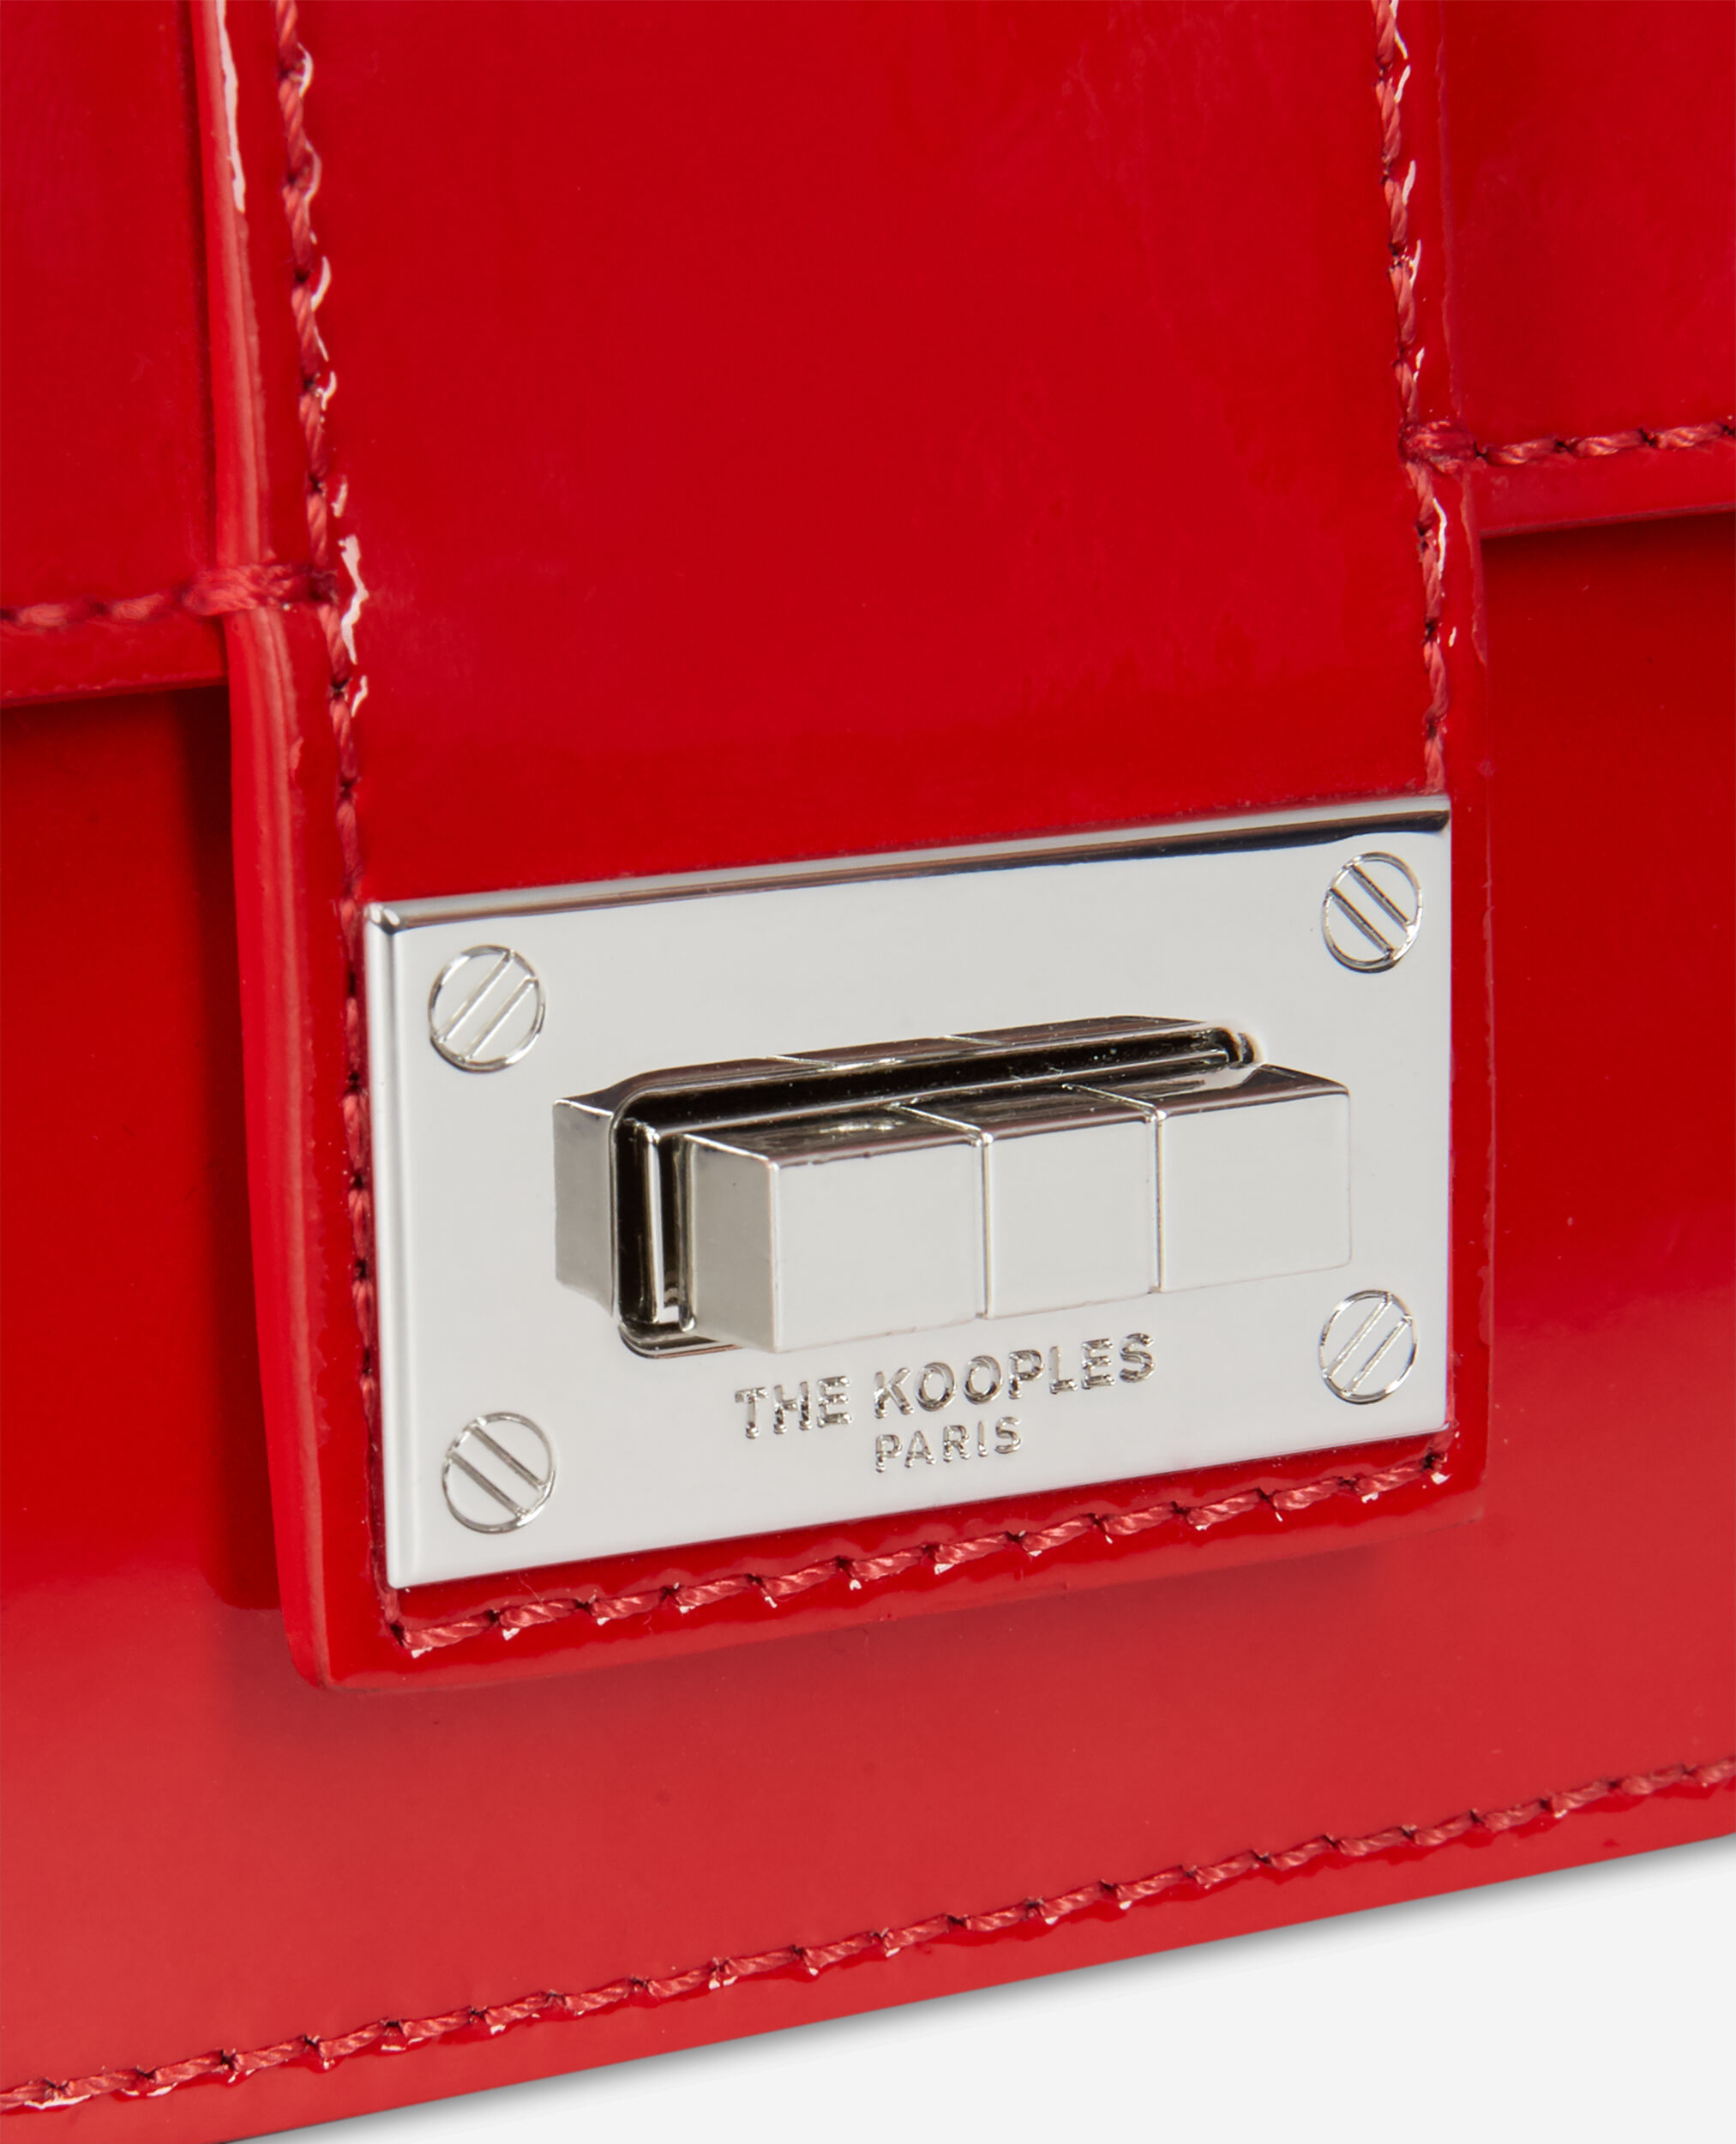 Pochette Emily small en cuir rouge, RED, hi-res image number null